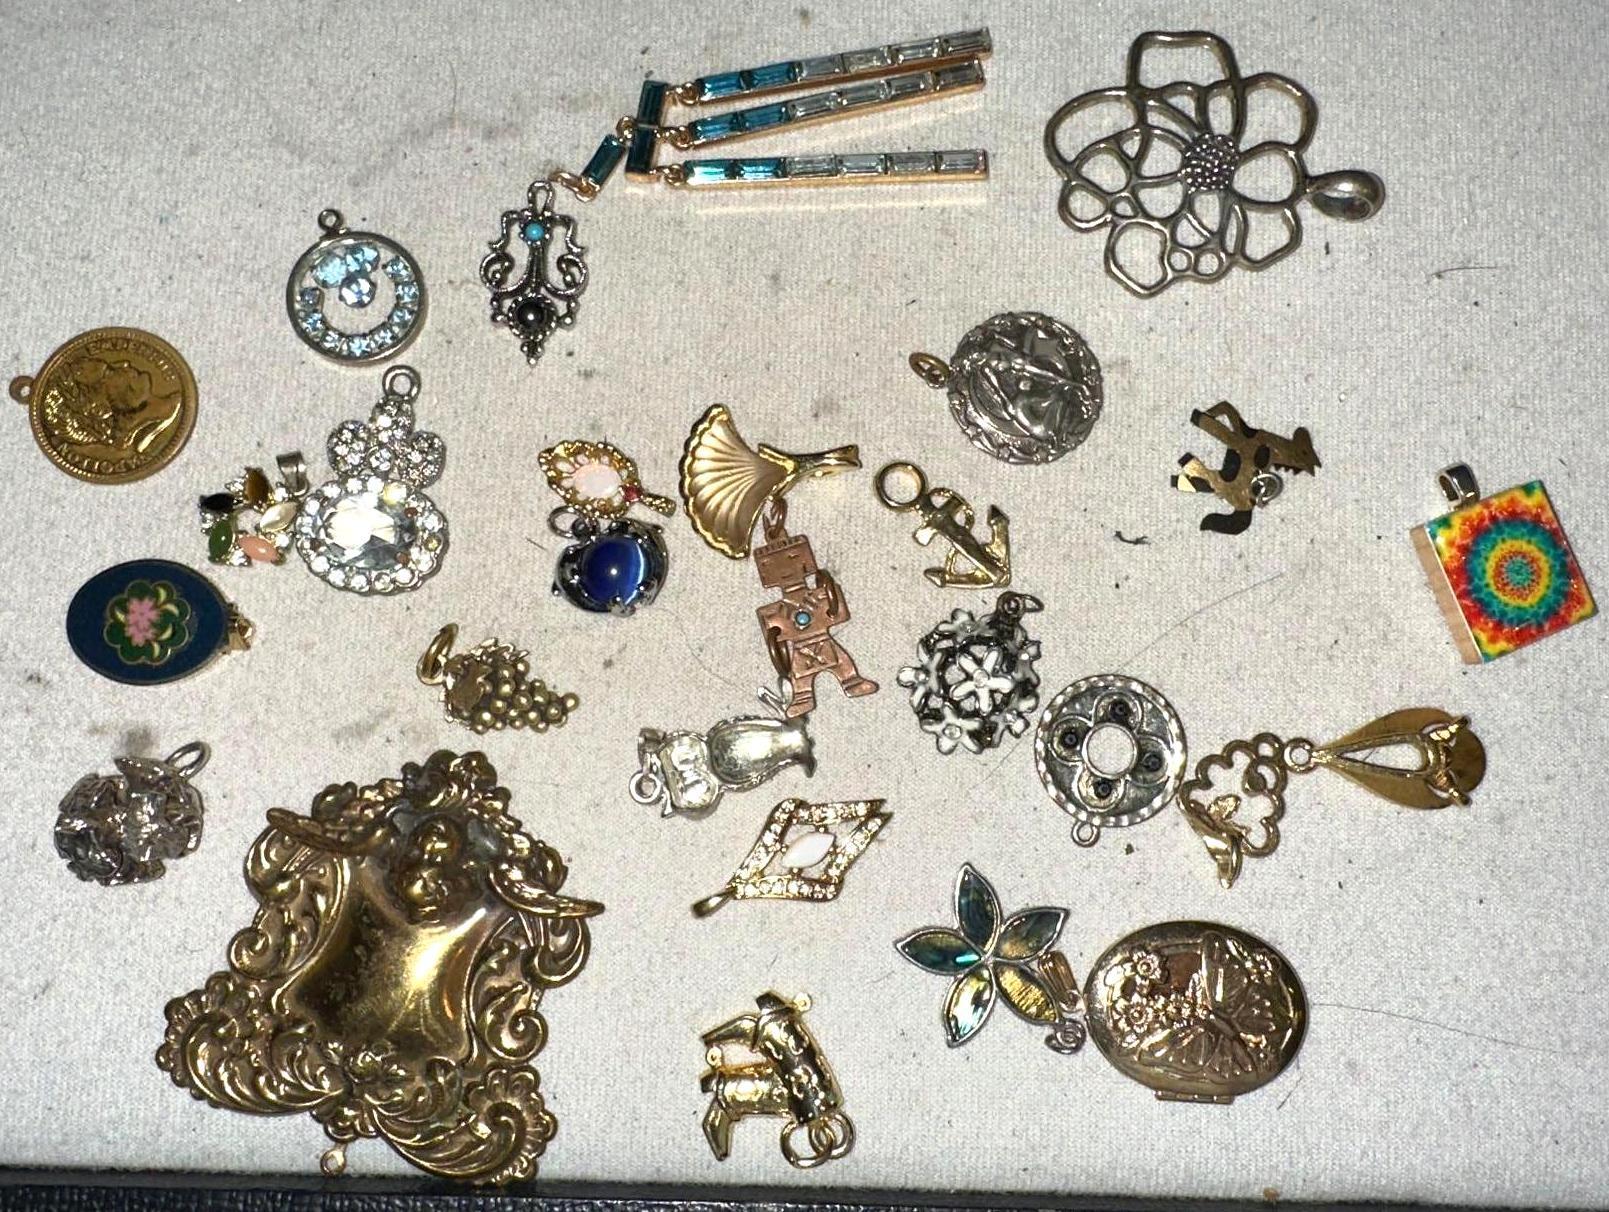 28 Assortment of Charms and Pendants